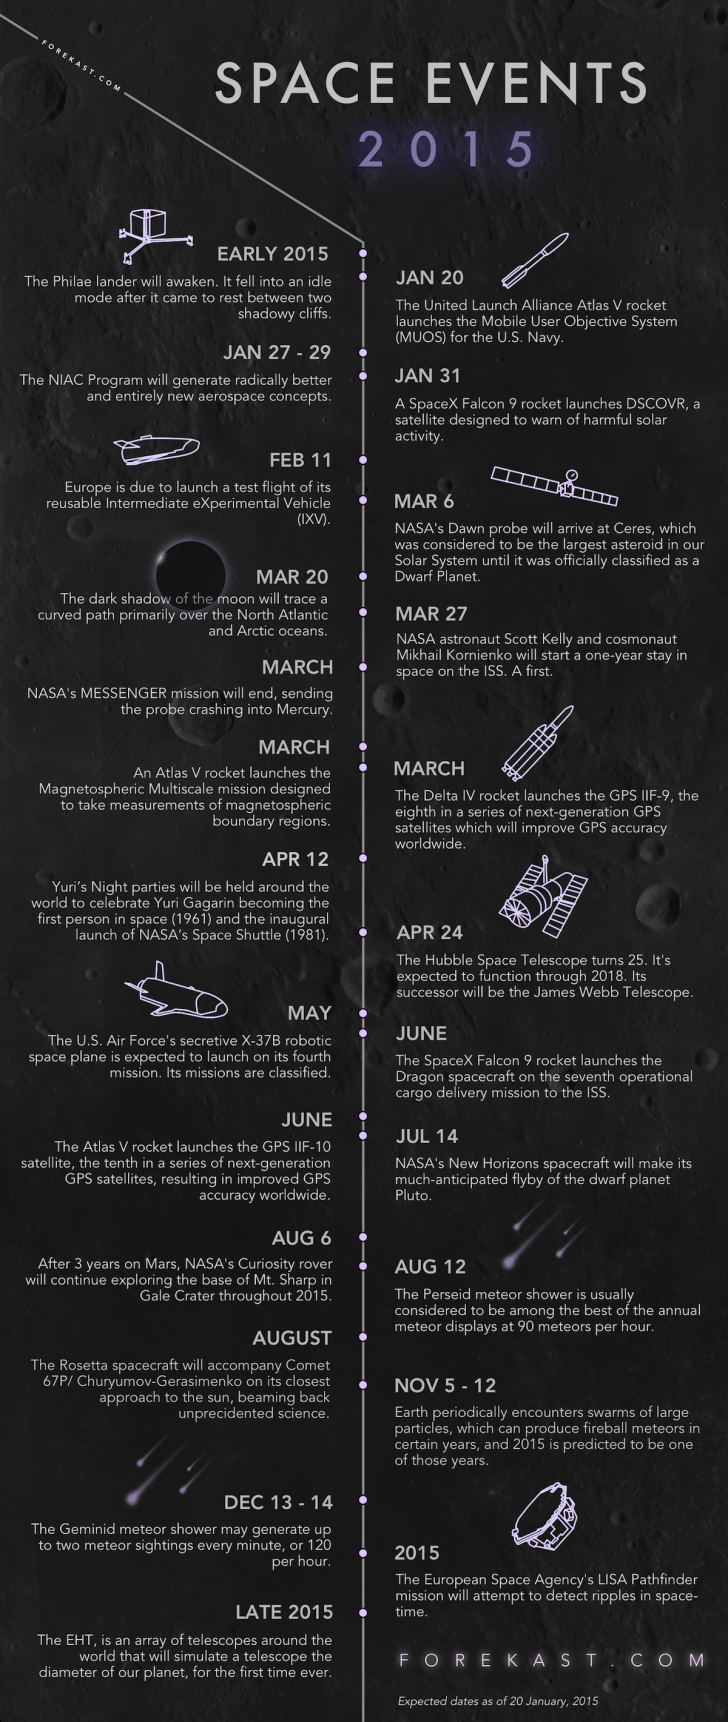 Upcoming Space Events of 2015